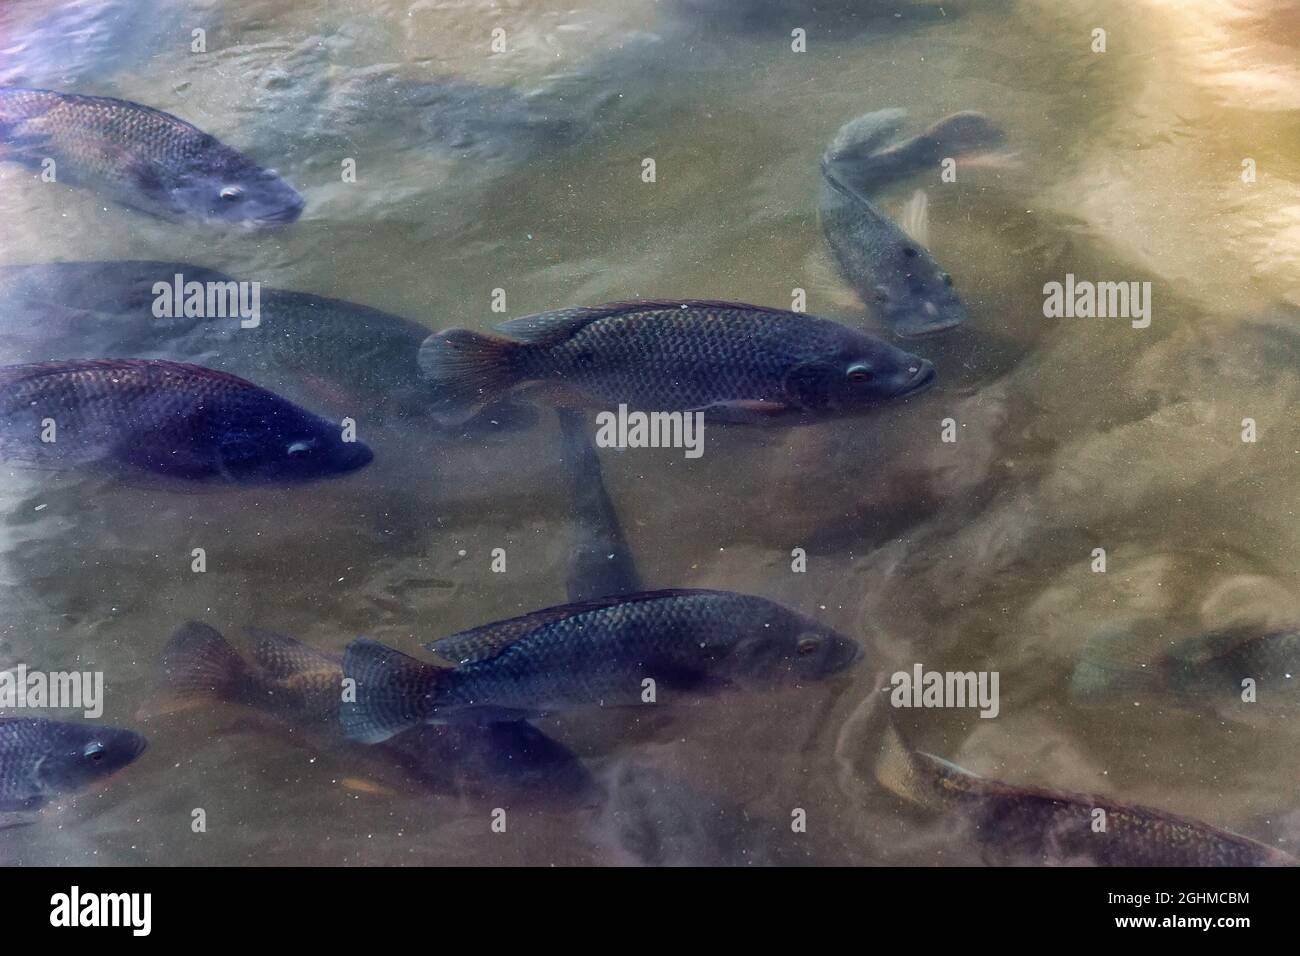 Nile Tilapia - this is a very tenacious fish, led convenient for artificial breeding and fish farming. You can see the mouth of a fish feeding from th Stock Photo